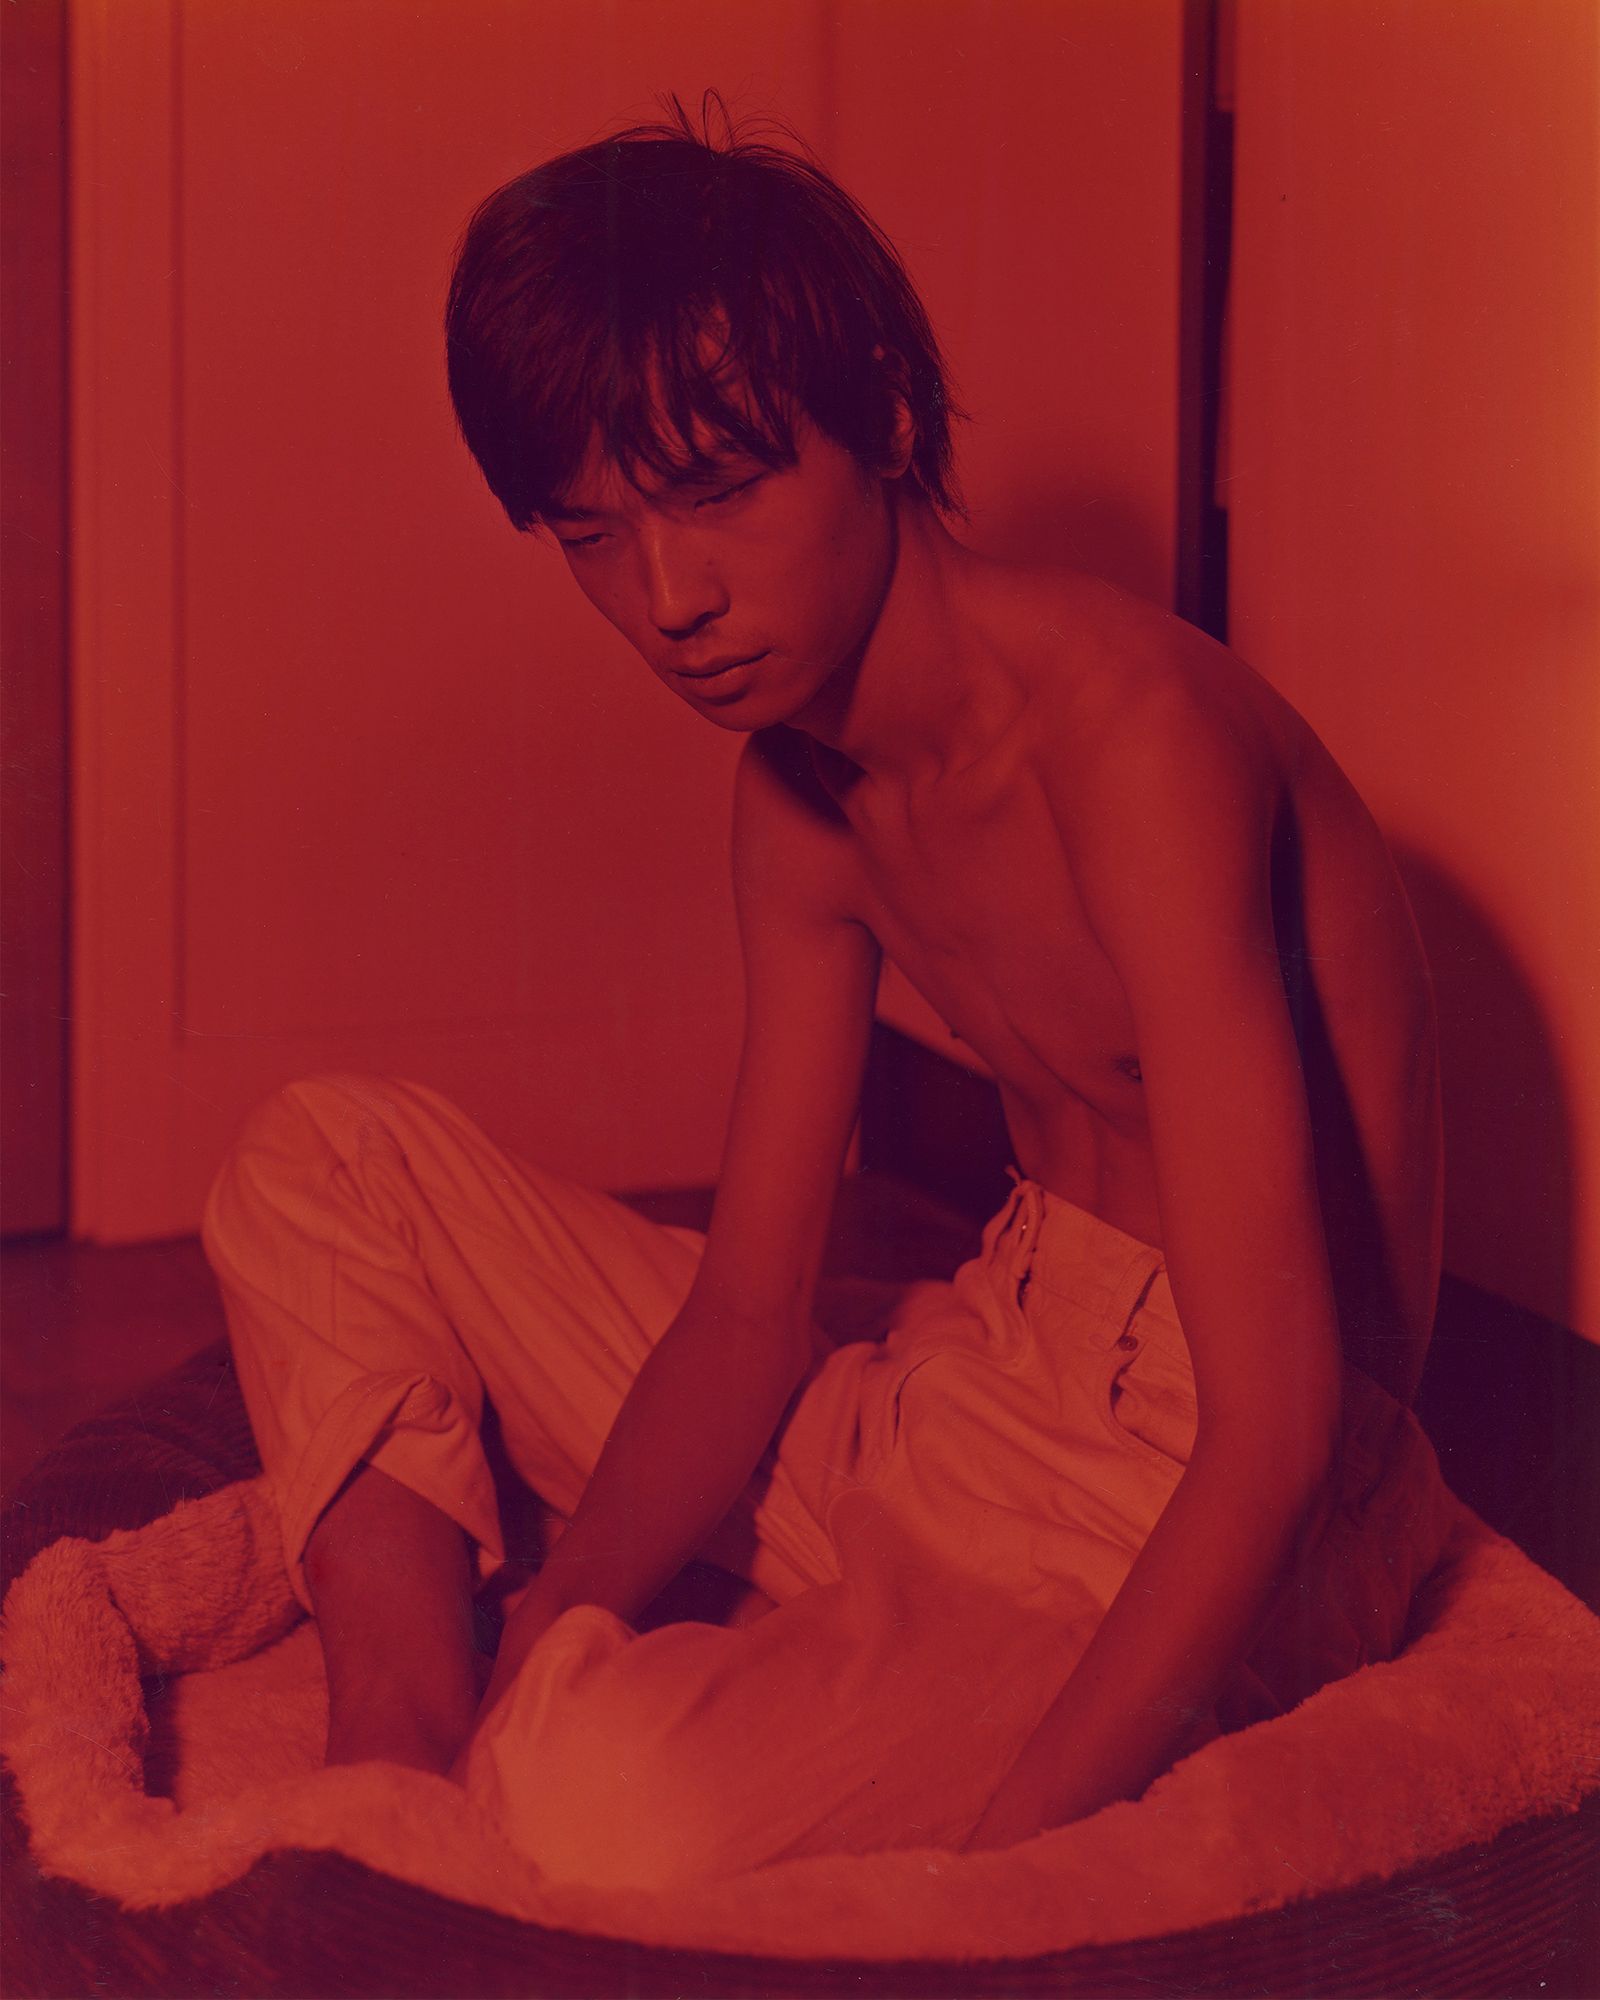 © Bowei Yang - Wong in the pet bed, color darkroom print, 2019.